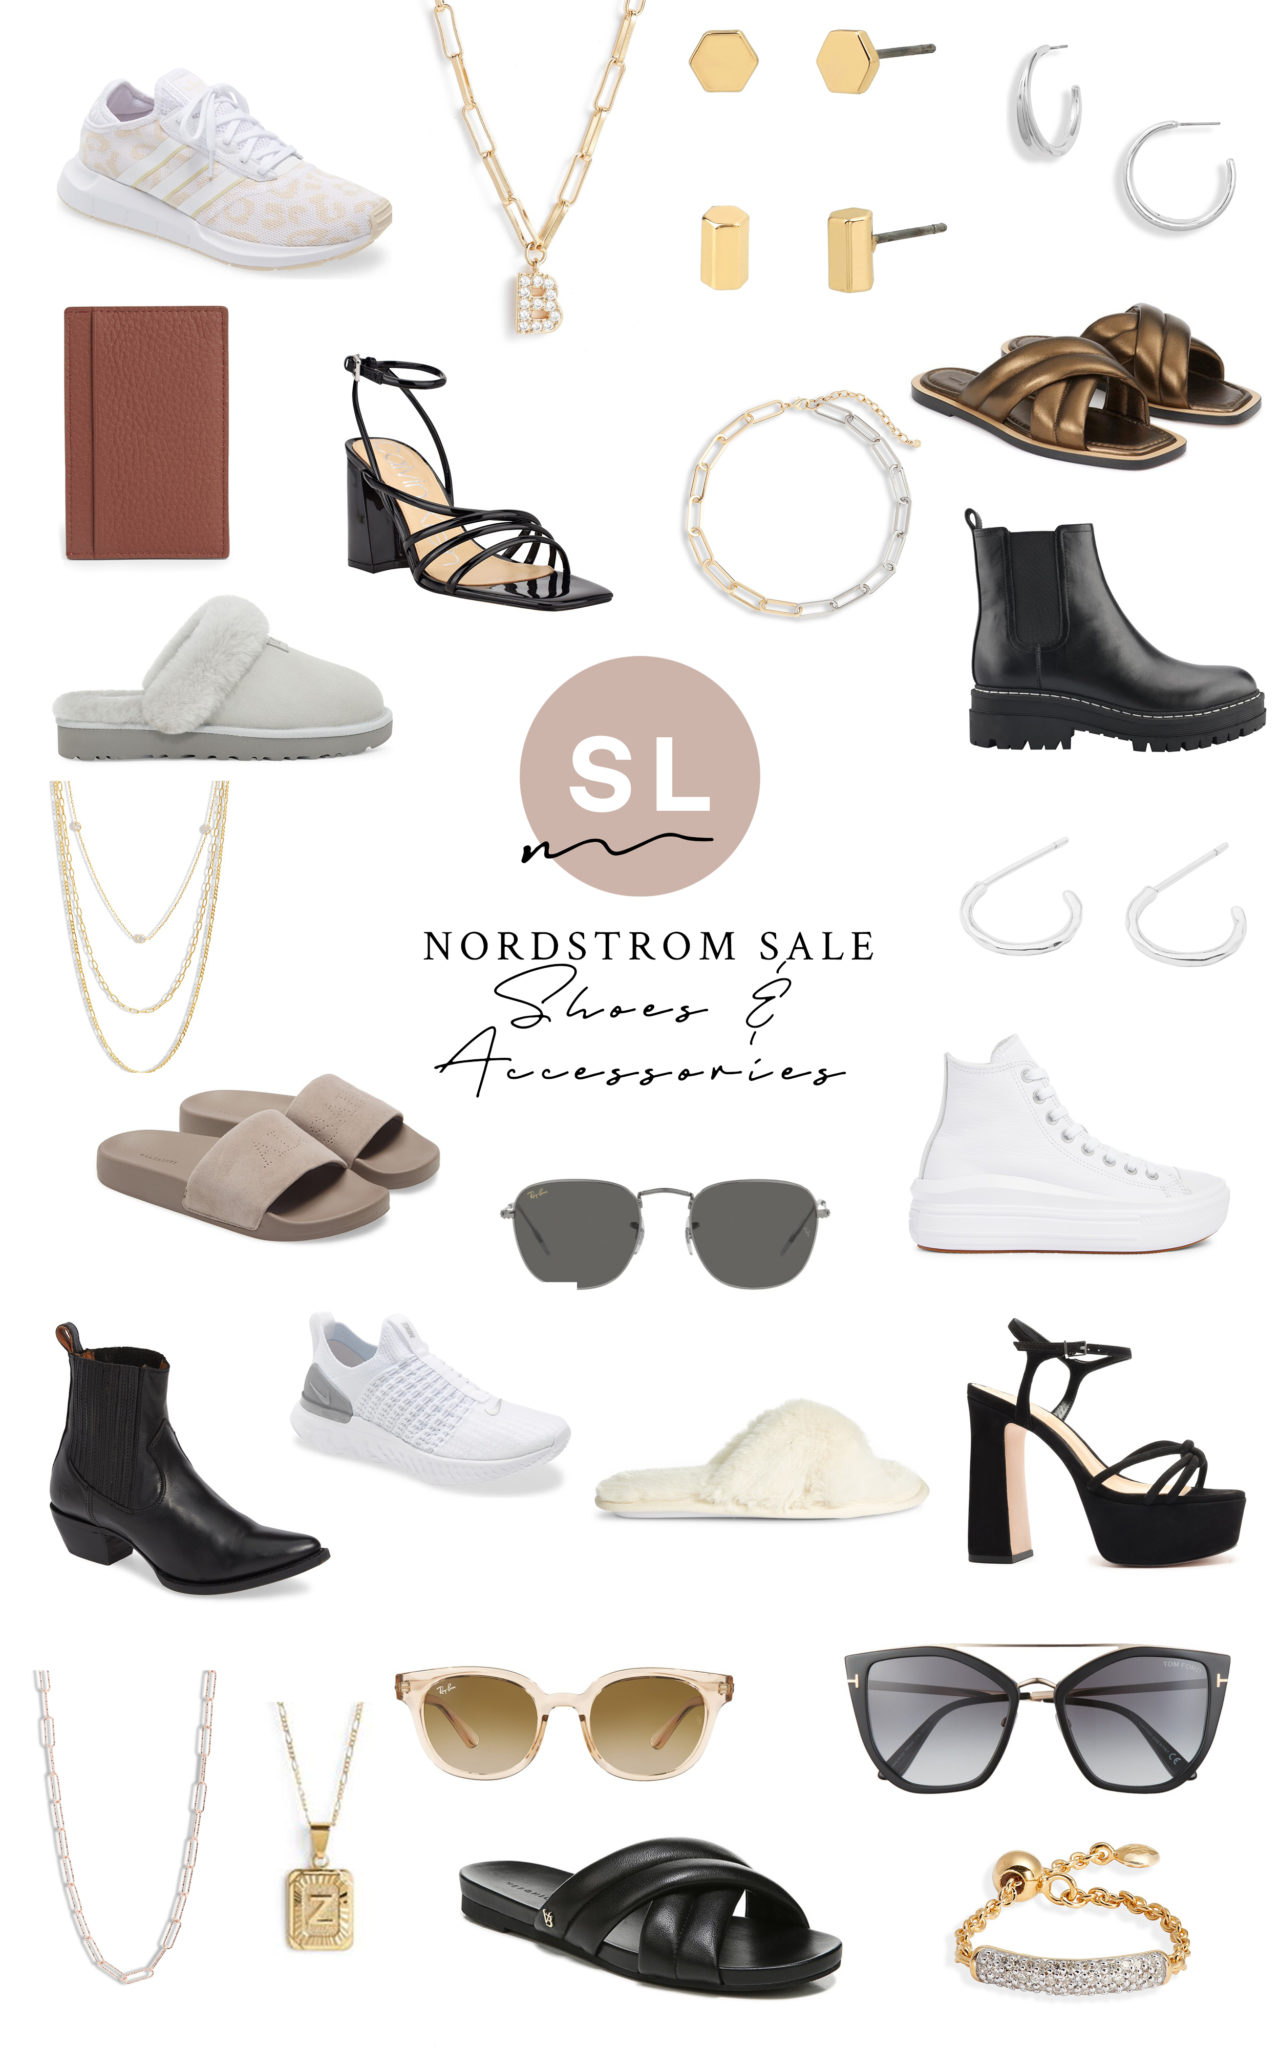 Nordstrom Anniversary Sale Public Access Shoes and Accessories